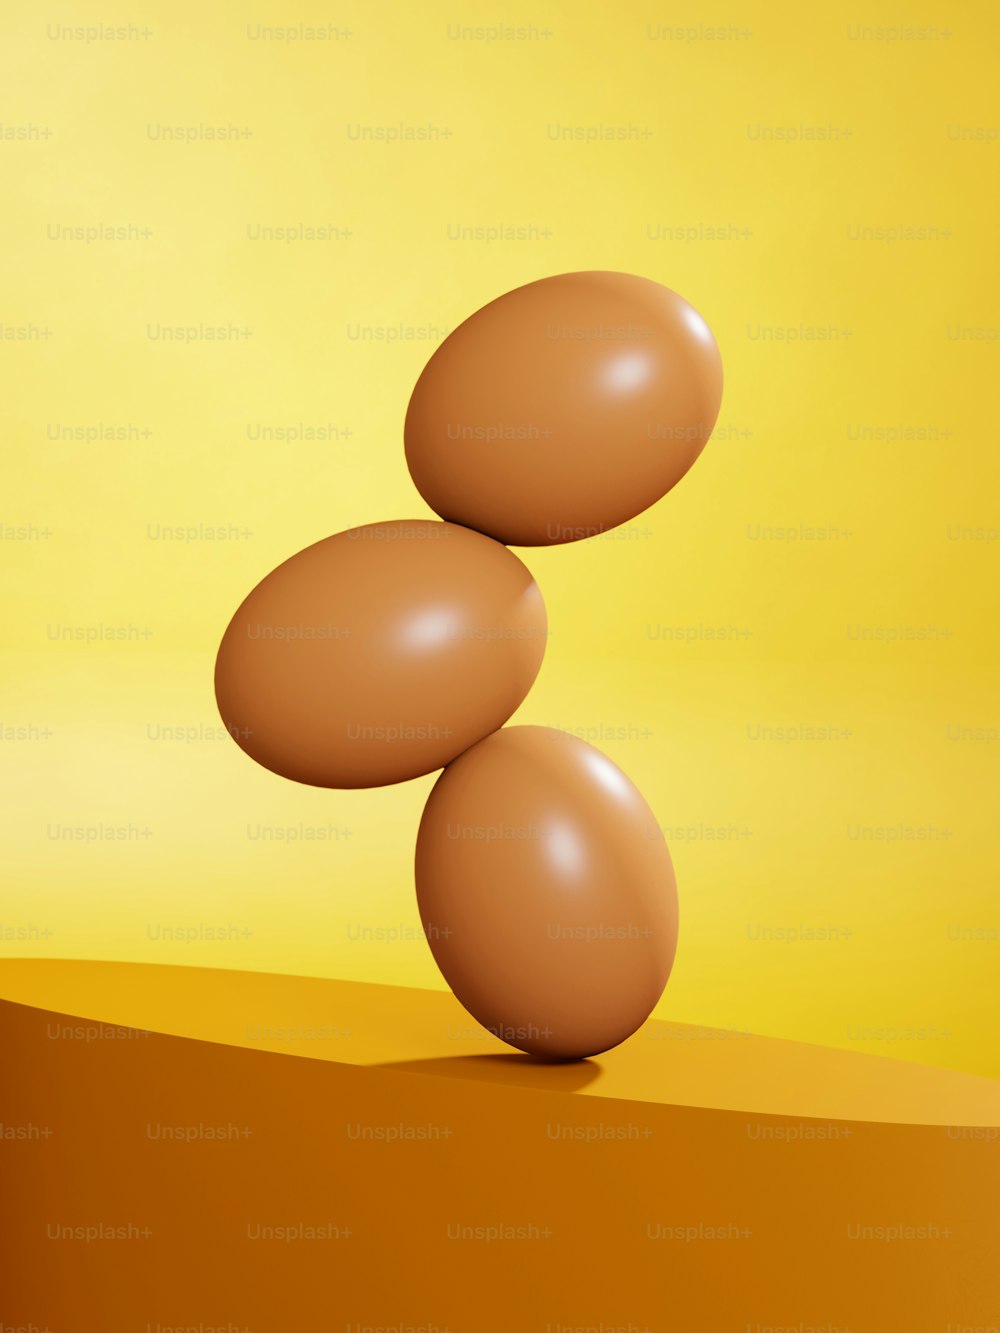 three eggs balancing on top of each other on a yellow background